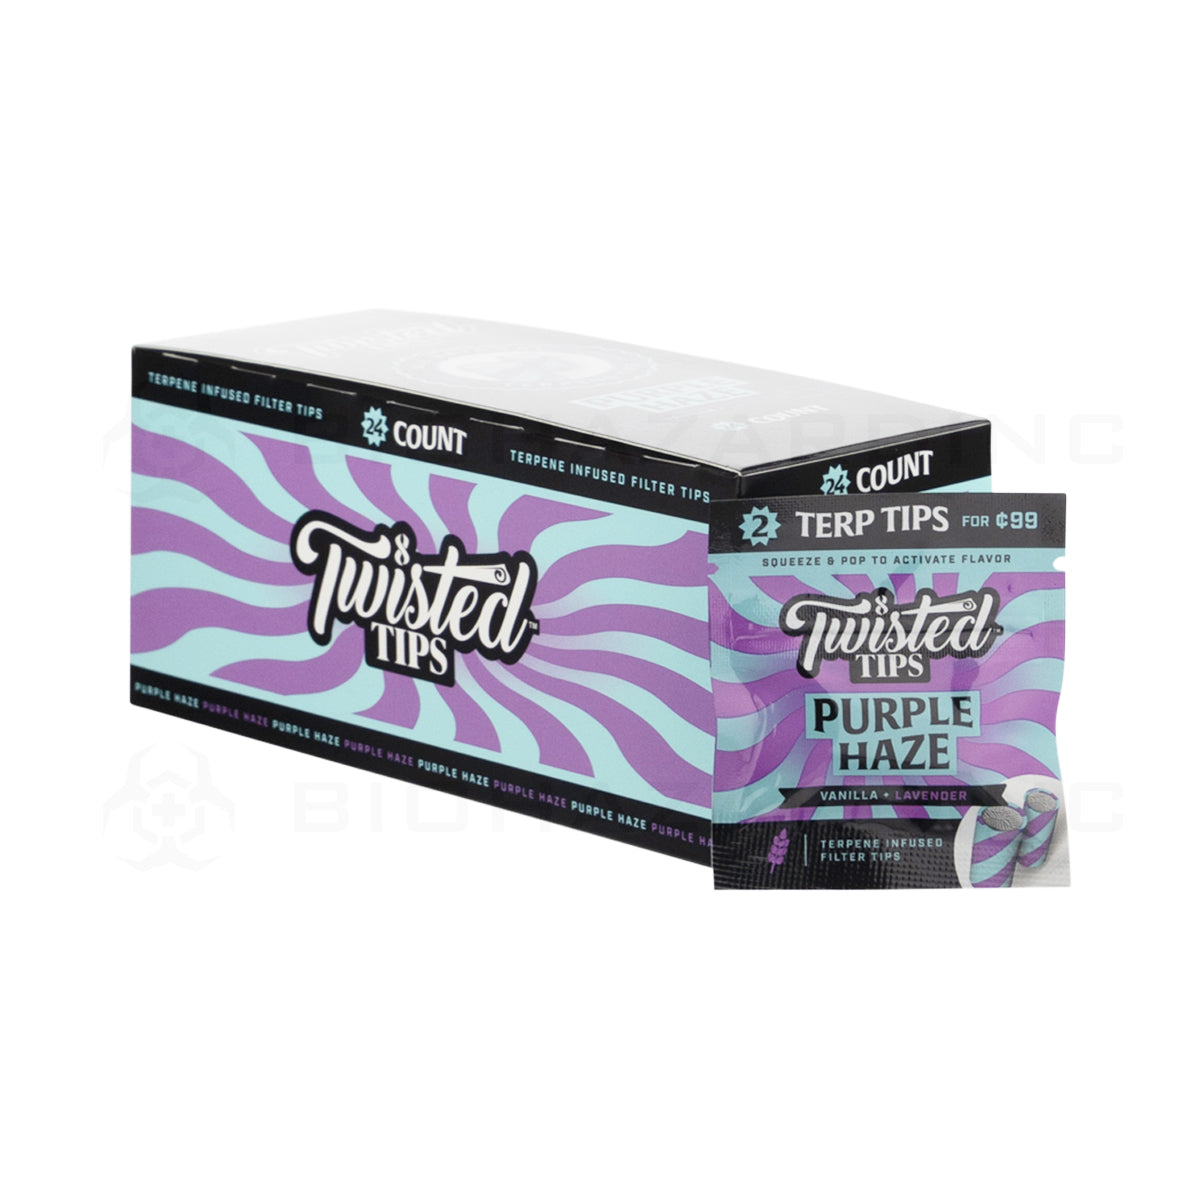 Twisted Tips | 'Retail Display' Terpene Infused 2 Packs | 24 Count Paper Tips Twisted Hemp   